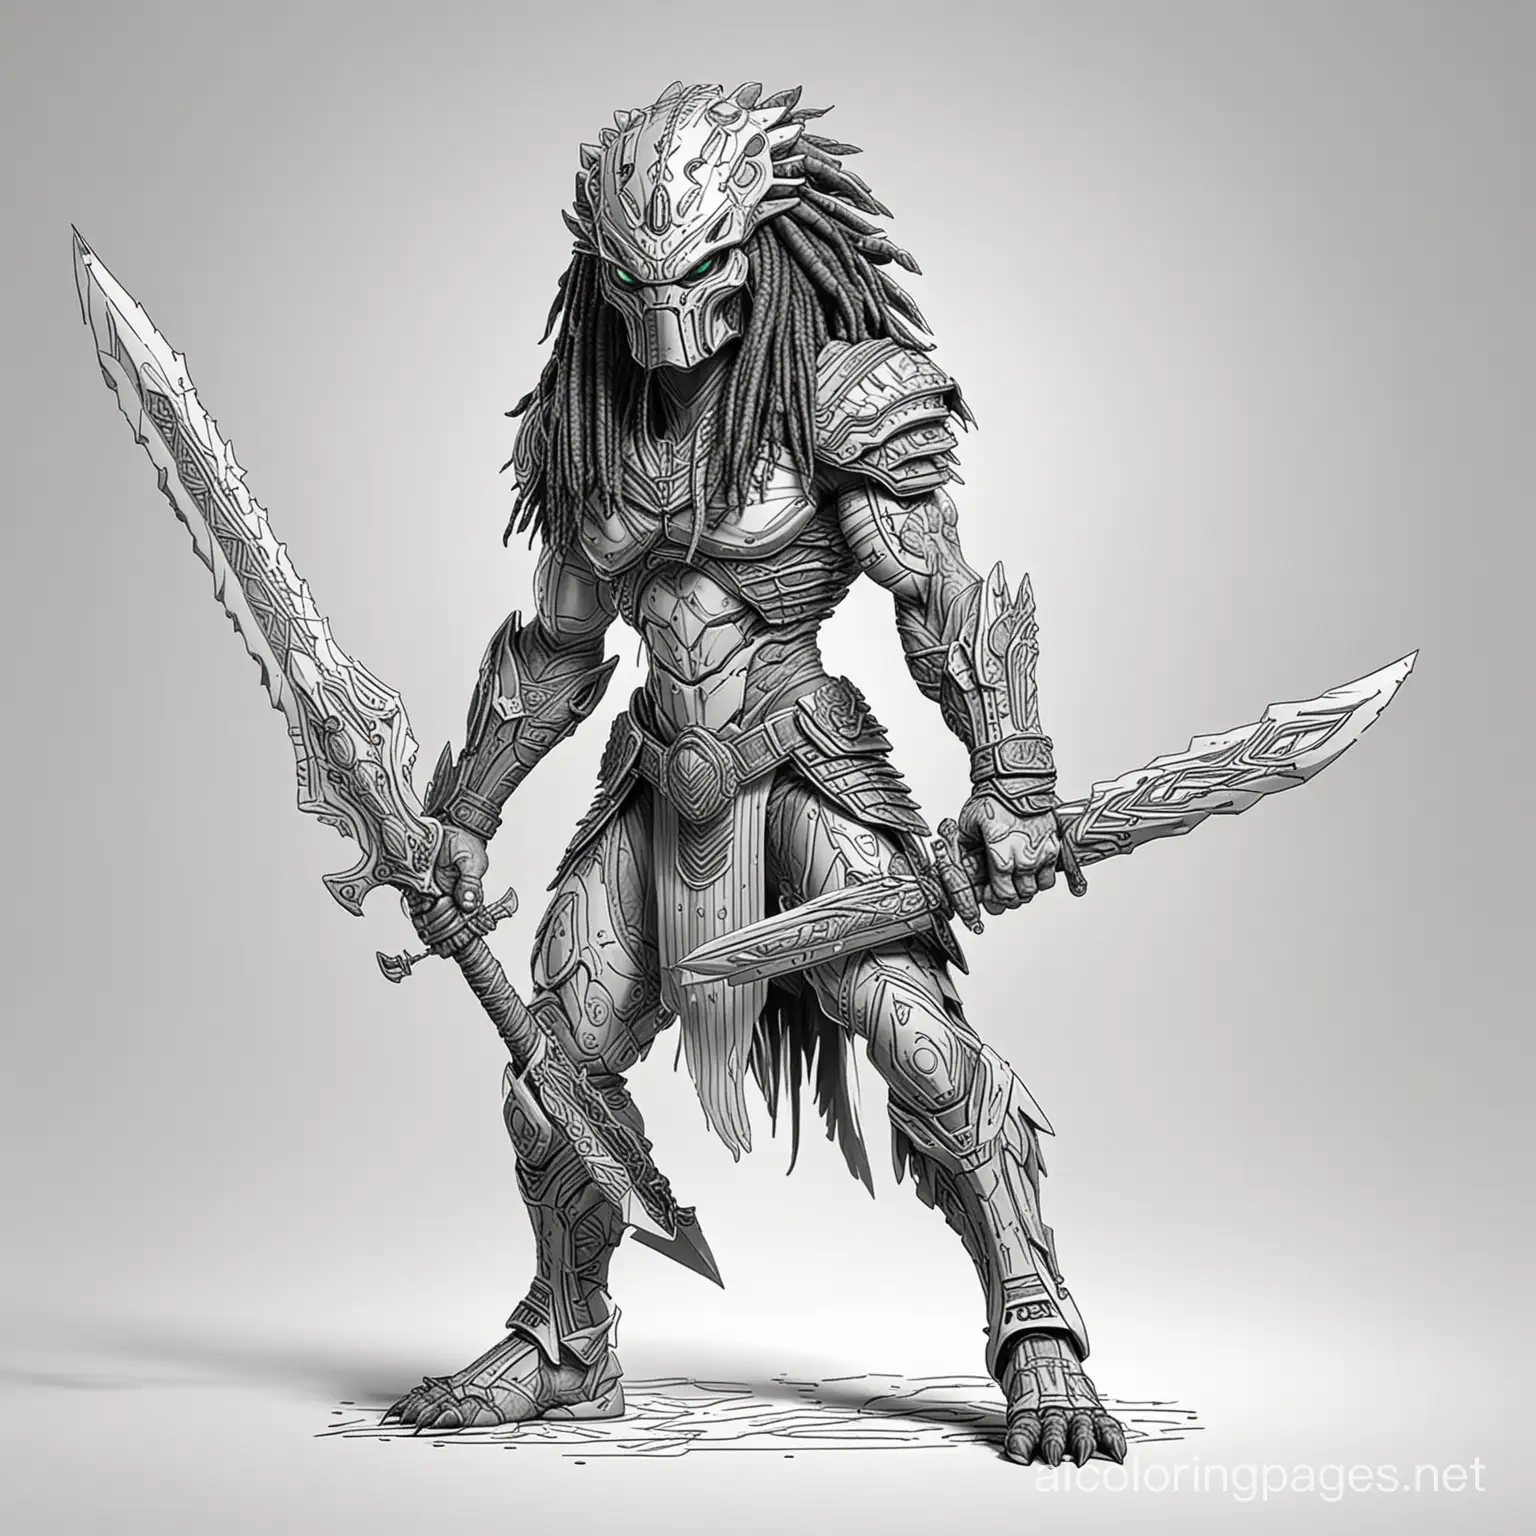 Yautja, predator art armed with an alien sword. Grey and green colors., Coloring Page, black and white, line art, white background, Simplicity, Ample White Space. The background of the coloring page is plain white to make it easy for young children to color within the lines. The outlines of all the subjects are easy to distinguish, making it simple for kids to color without too much difficulty